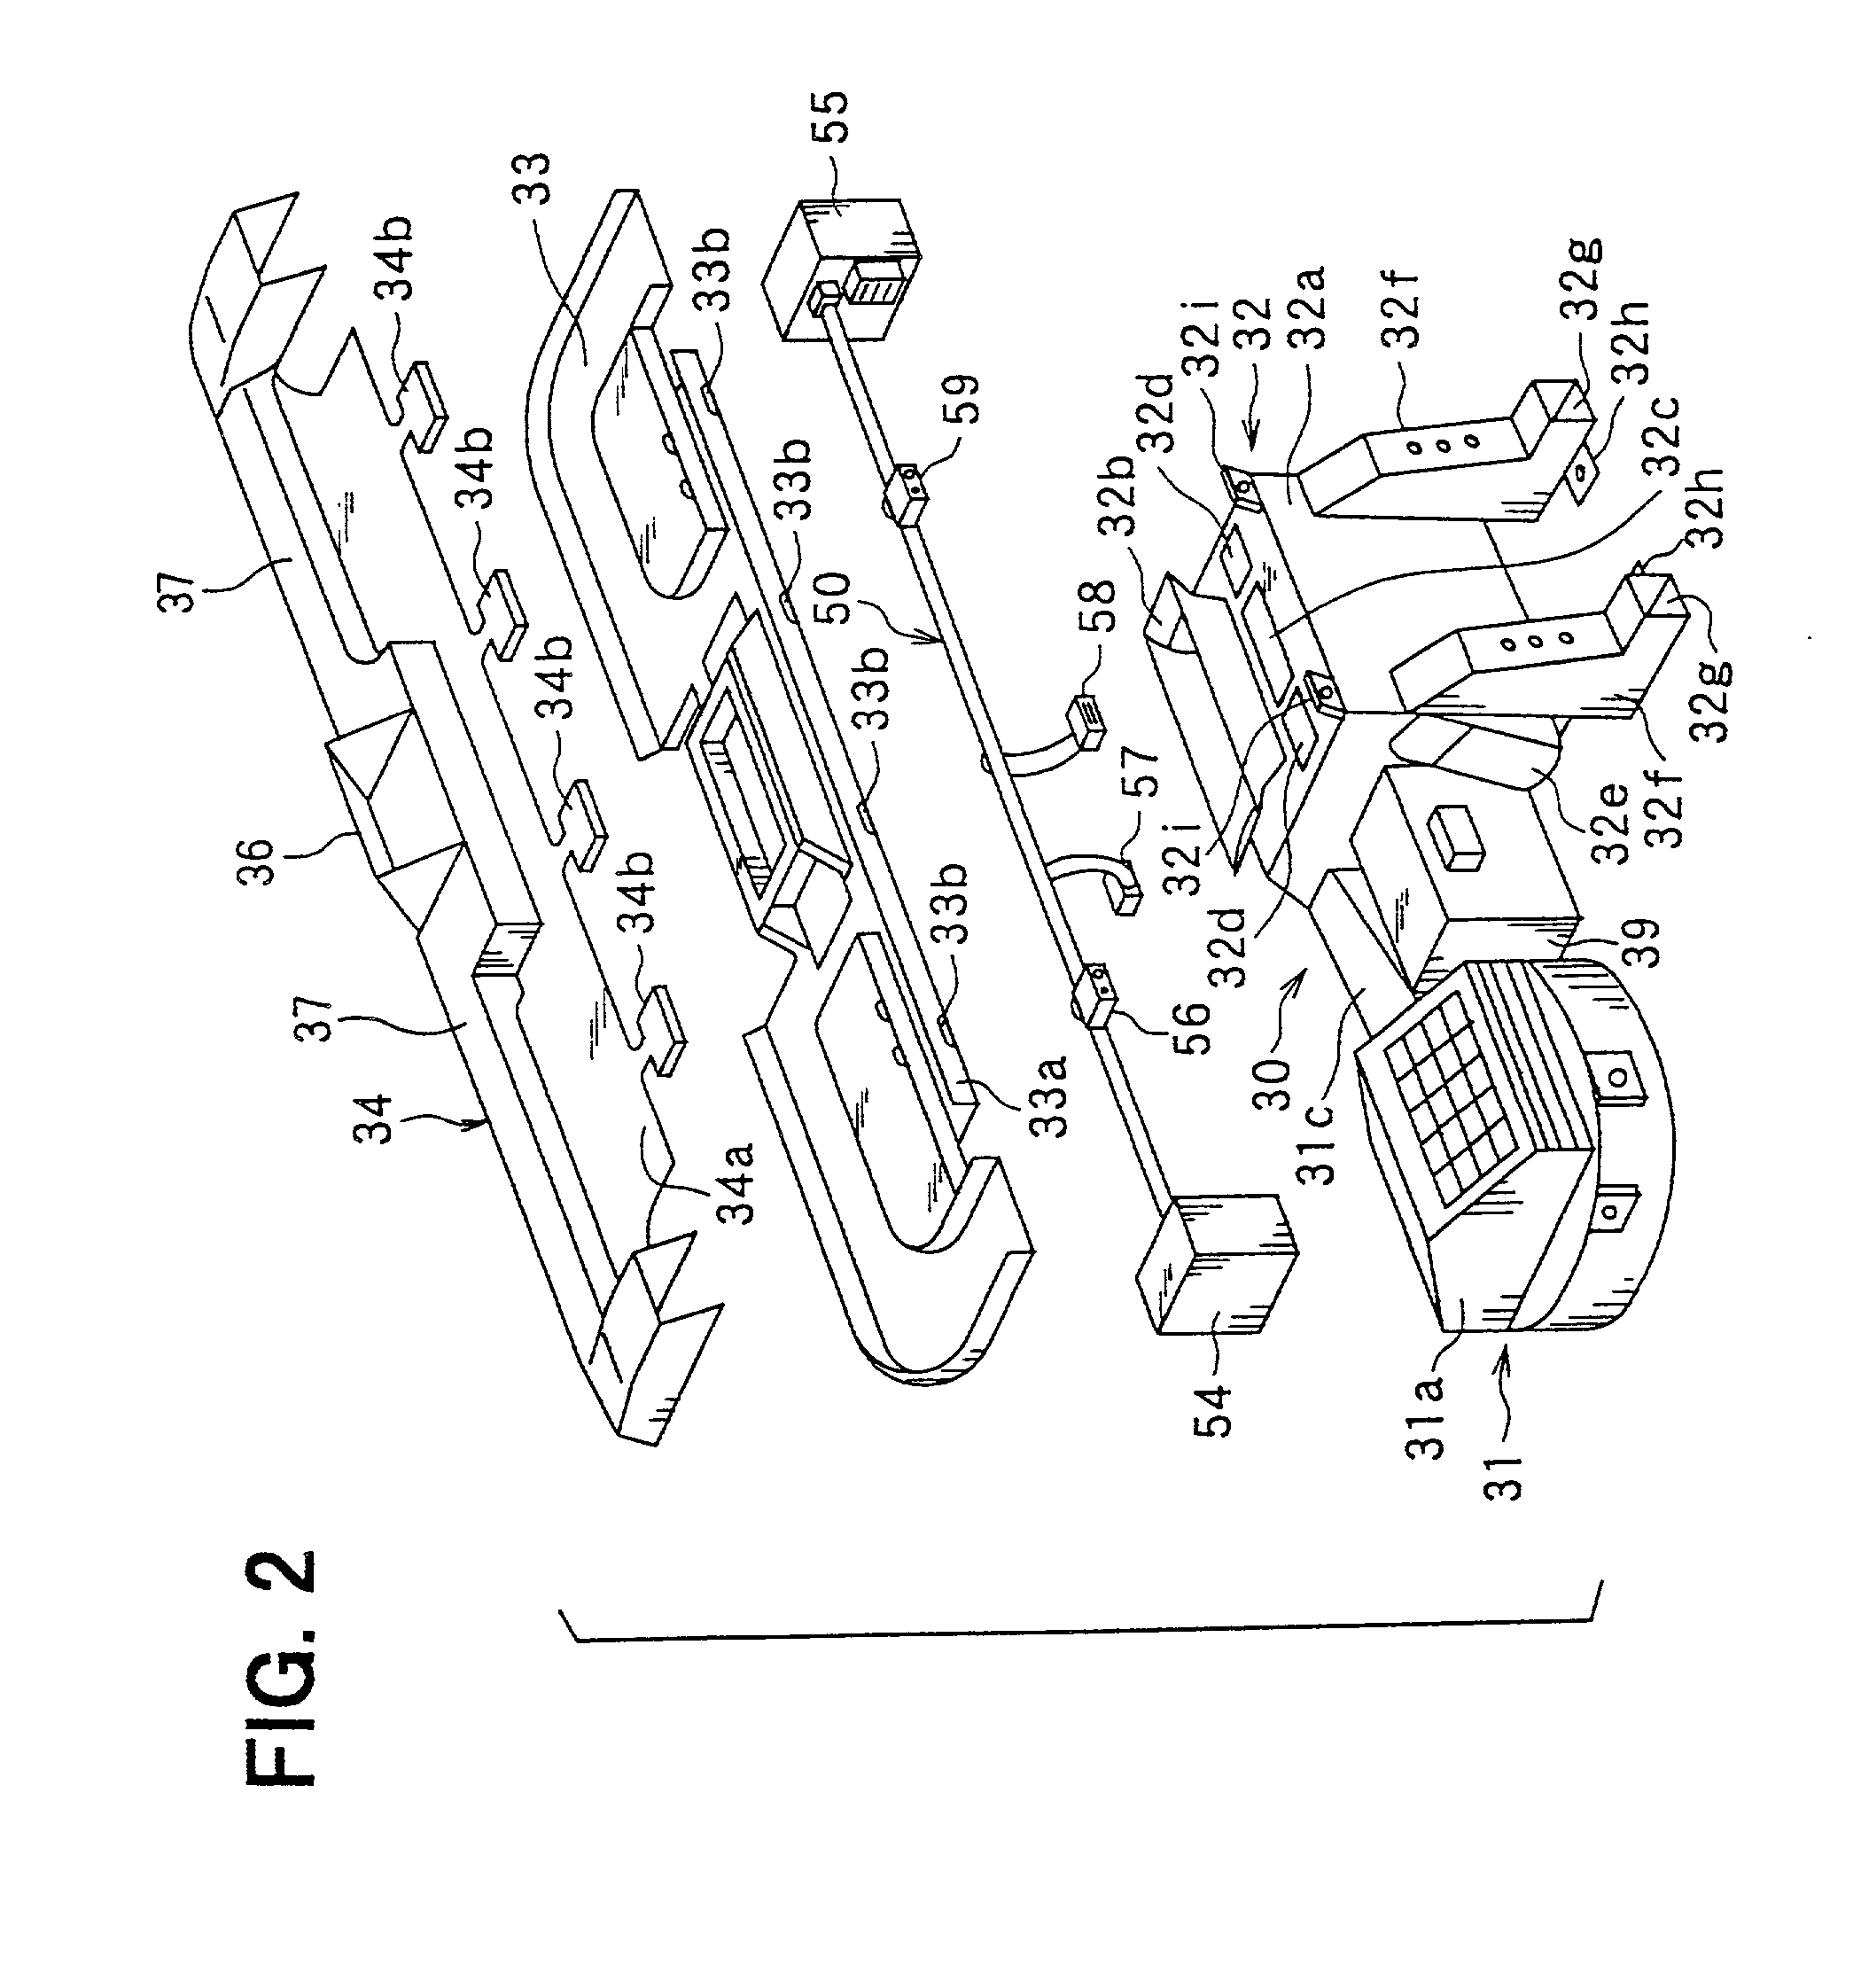 Wiring system of indication instrument for vehicle